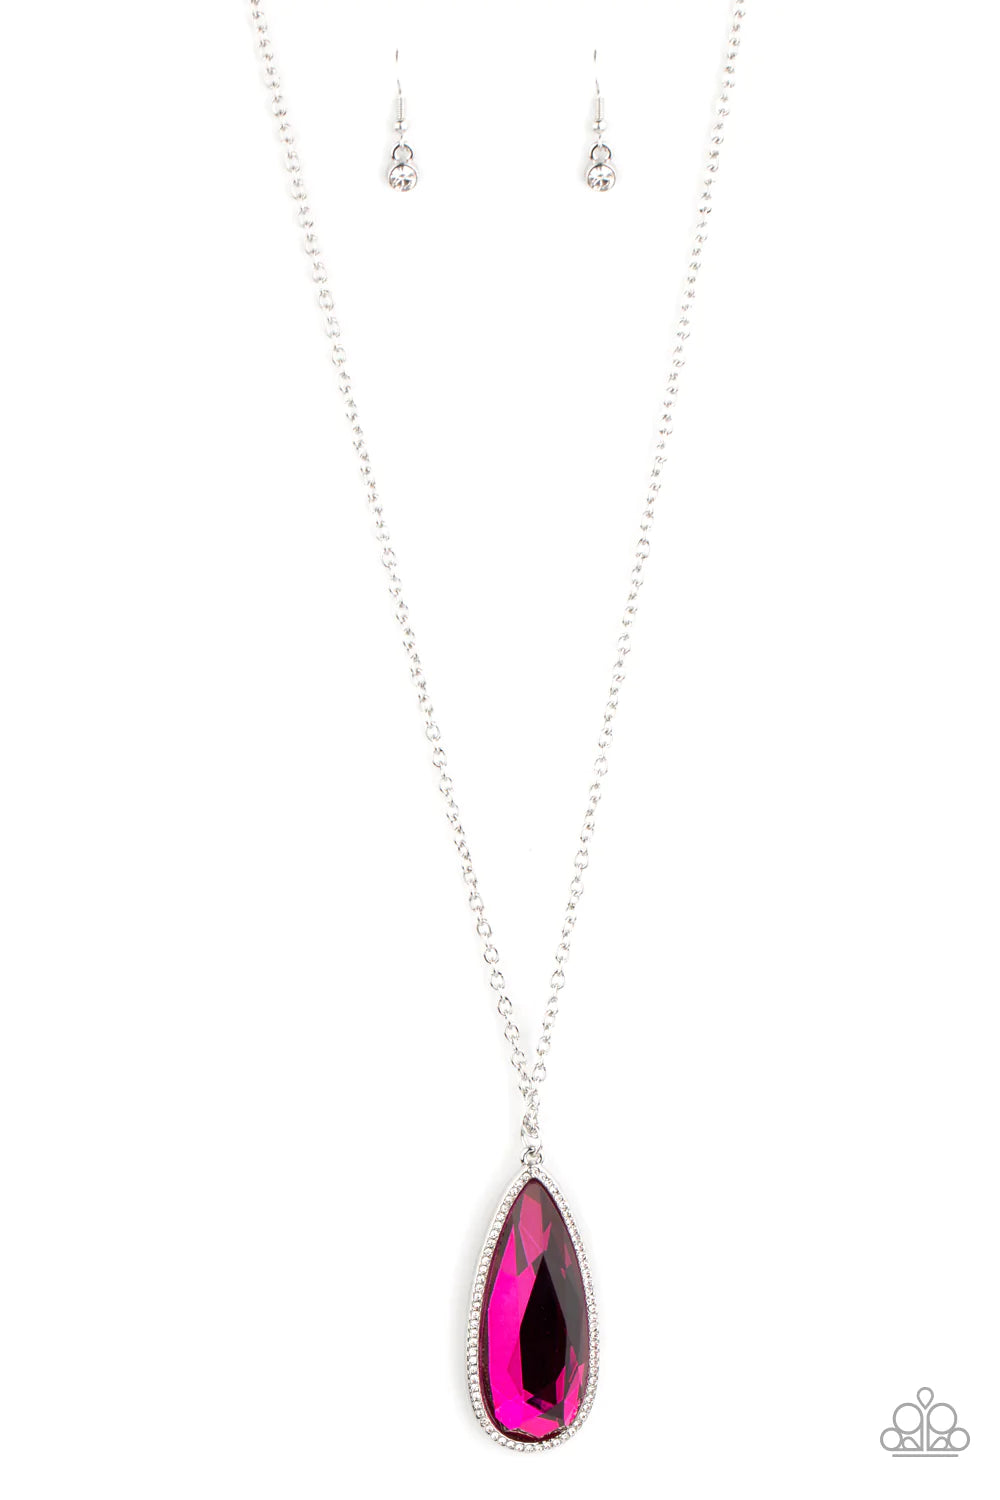 Paparazzi Necklace ~ Watch Out For REIGN - Pink